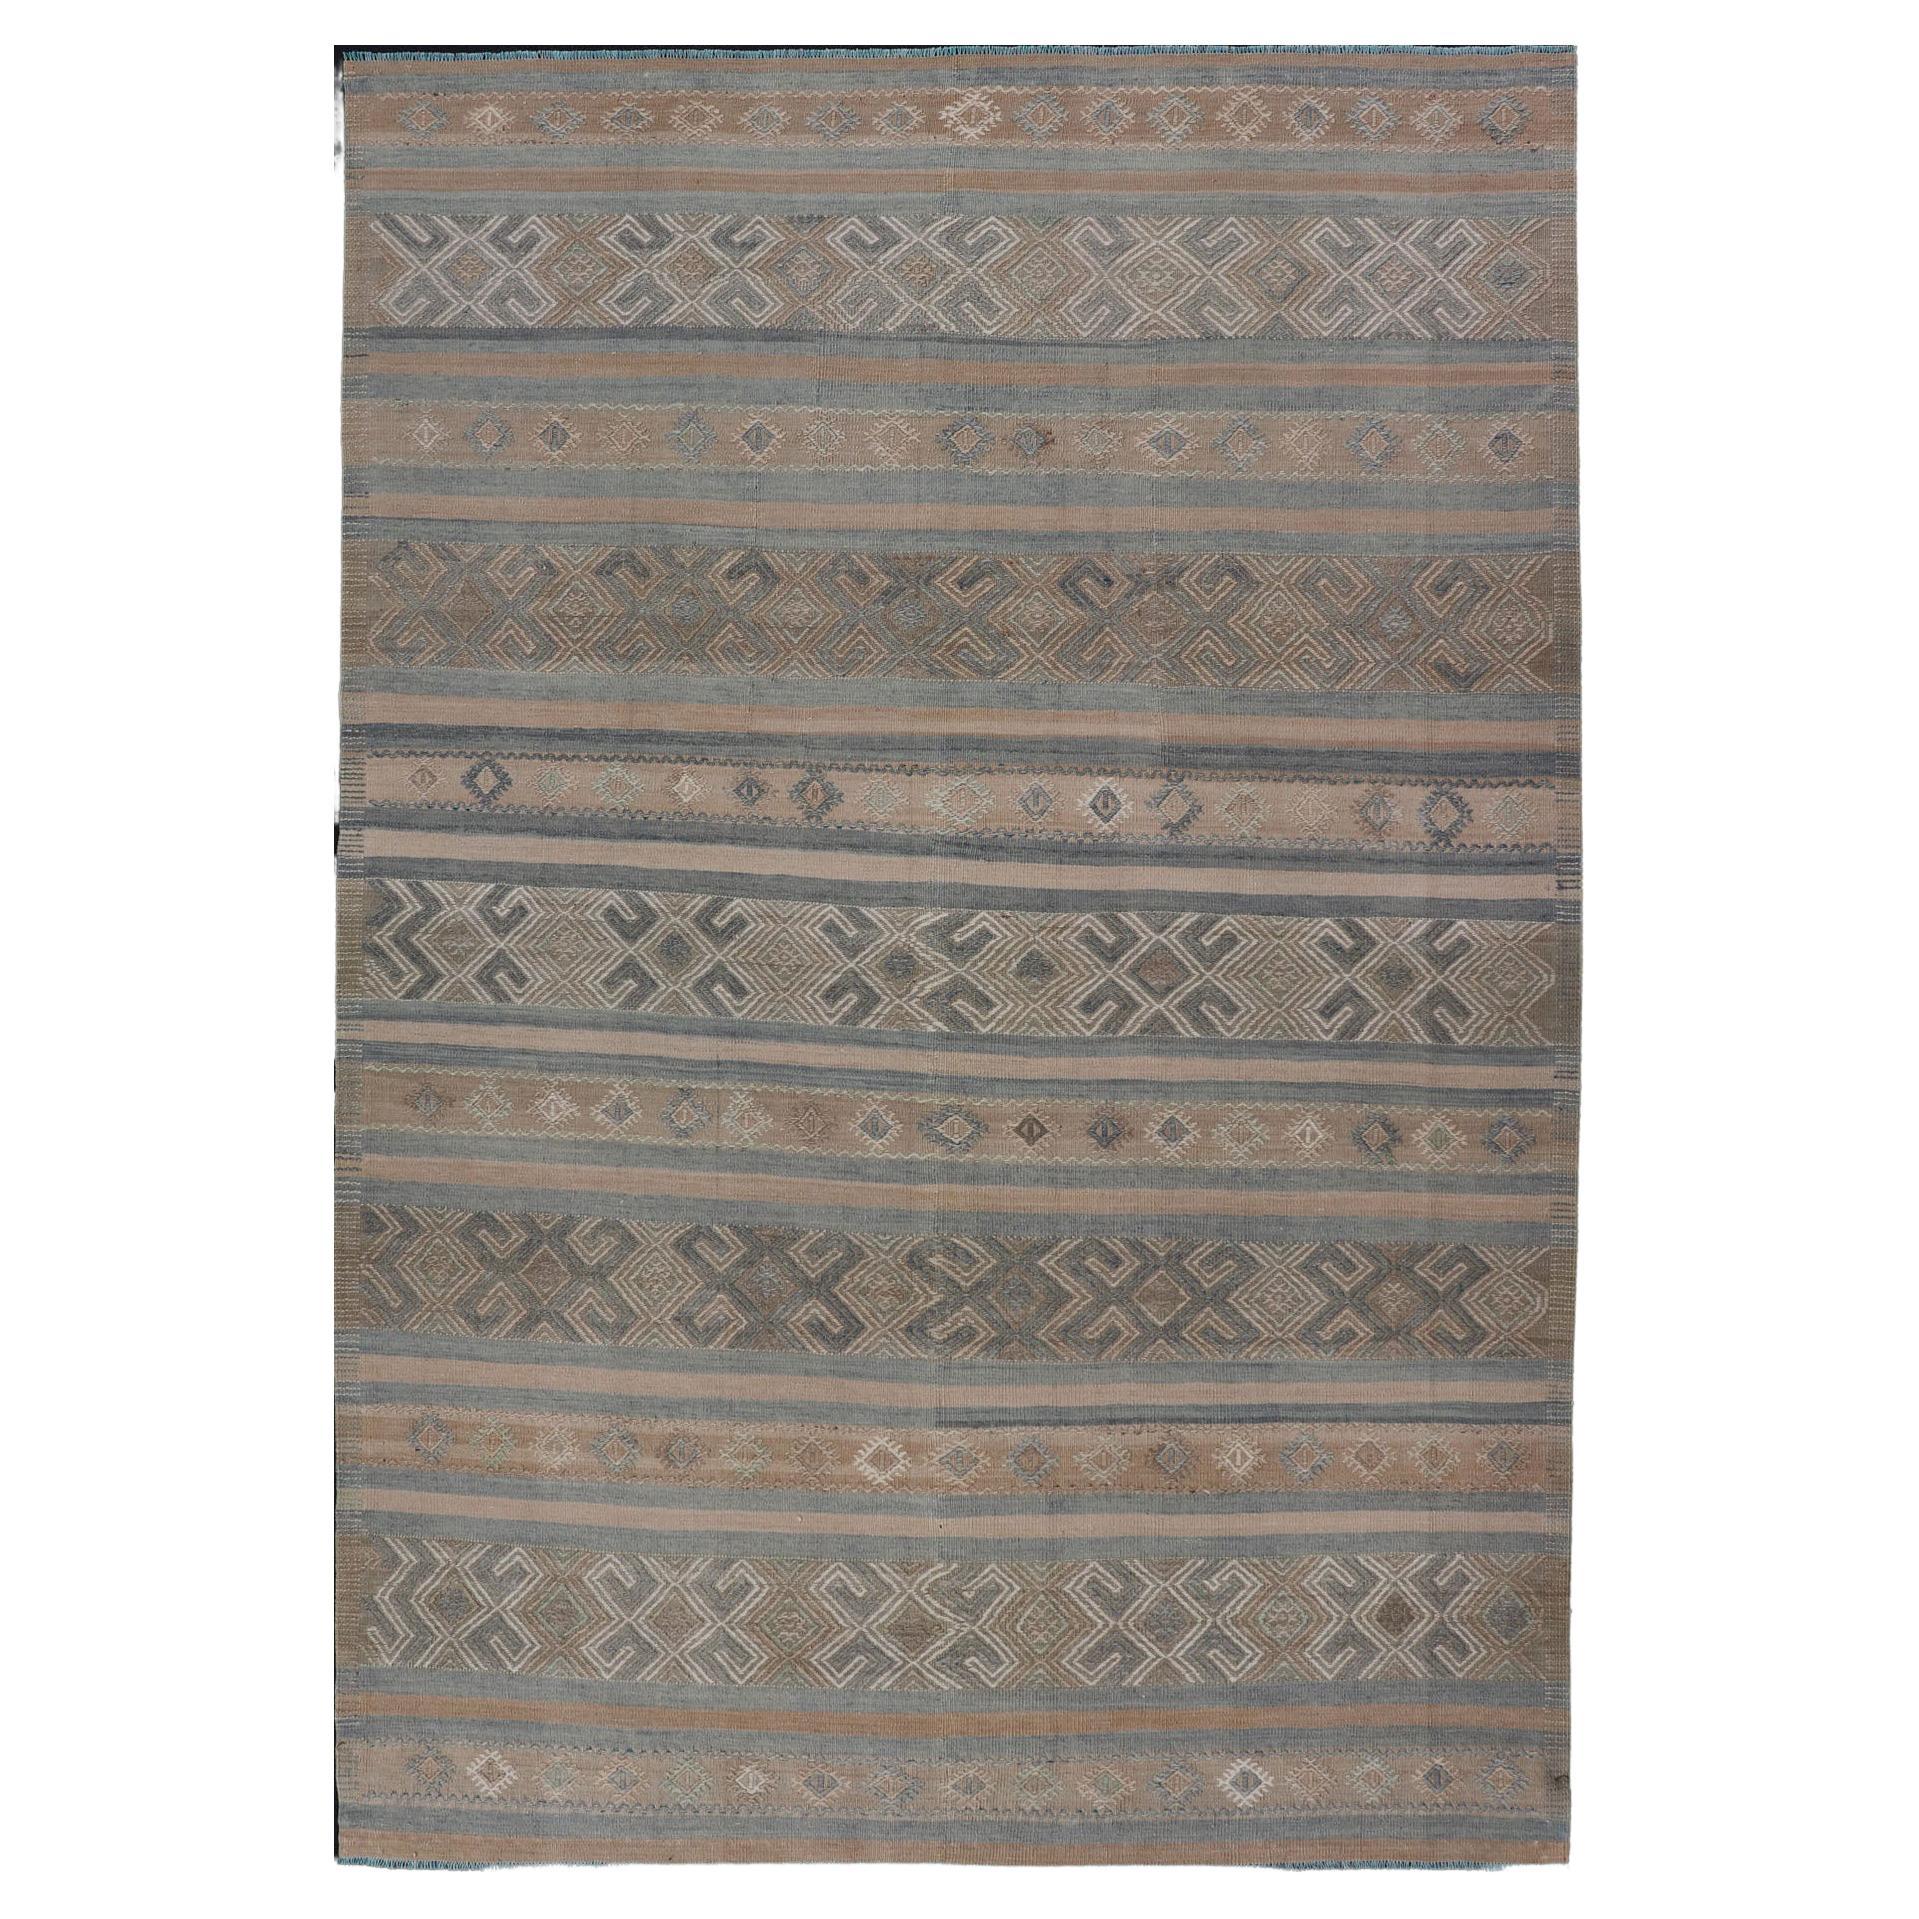 Vintage Turkish Kilim Rug with Horizontal Stripes in Taupe and Neutral Colors